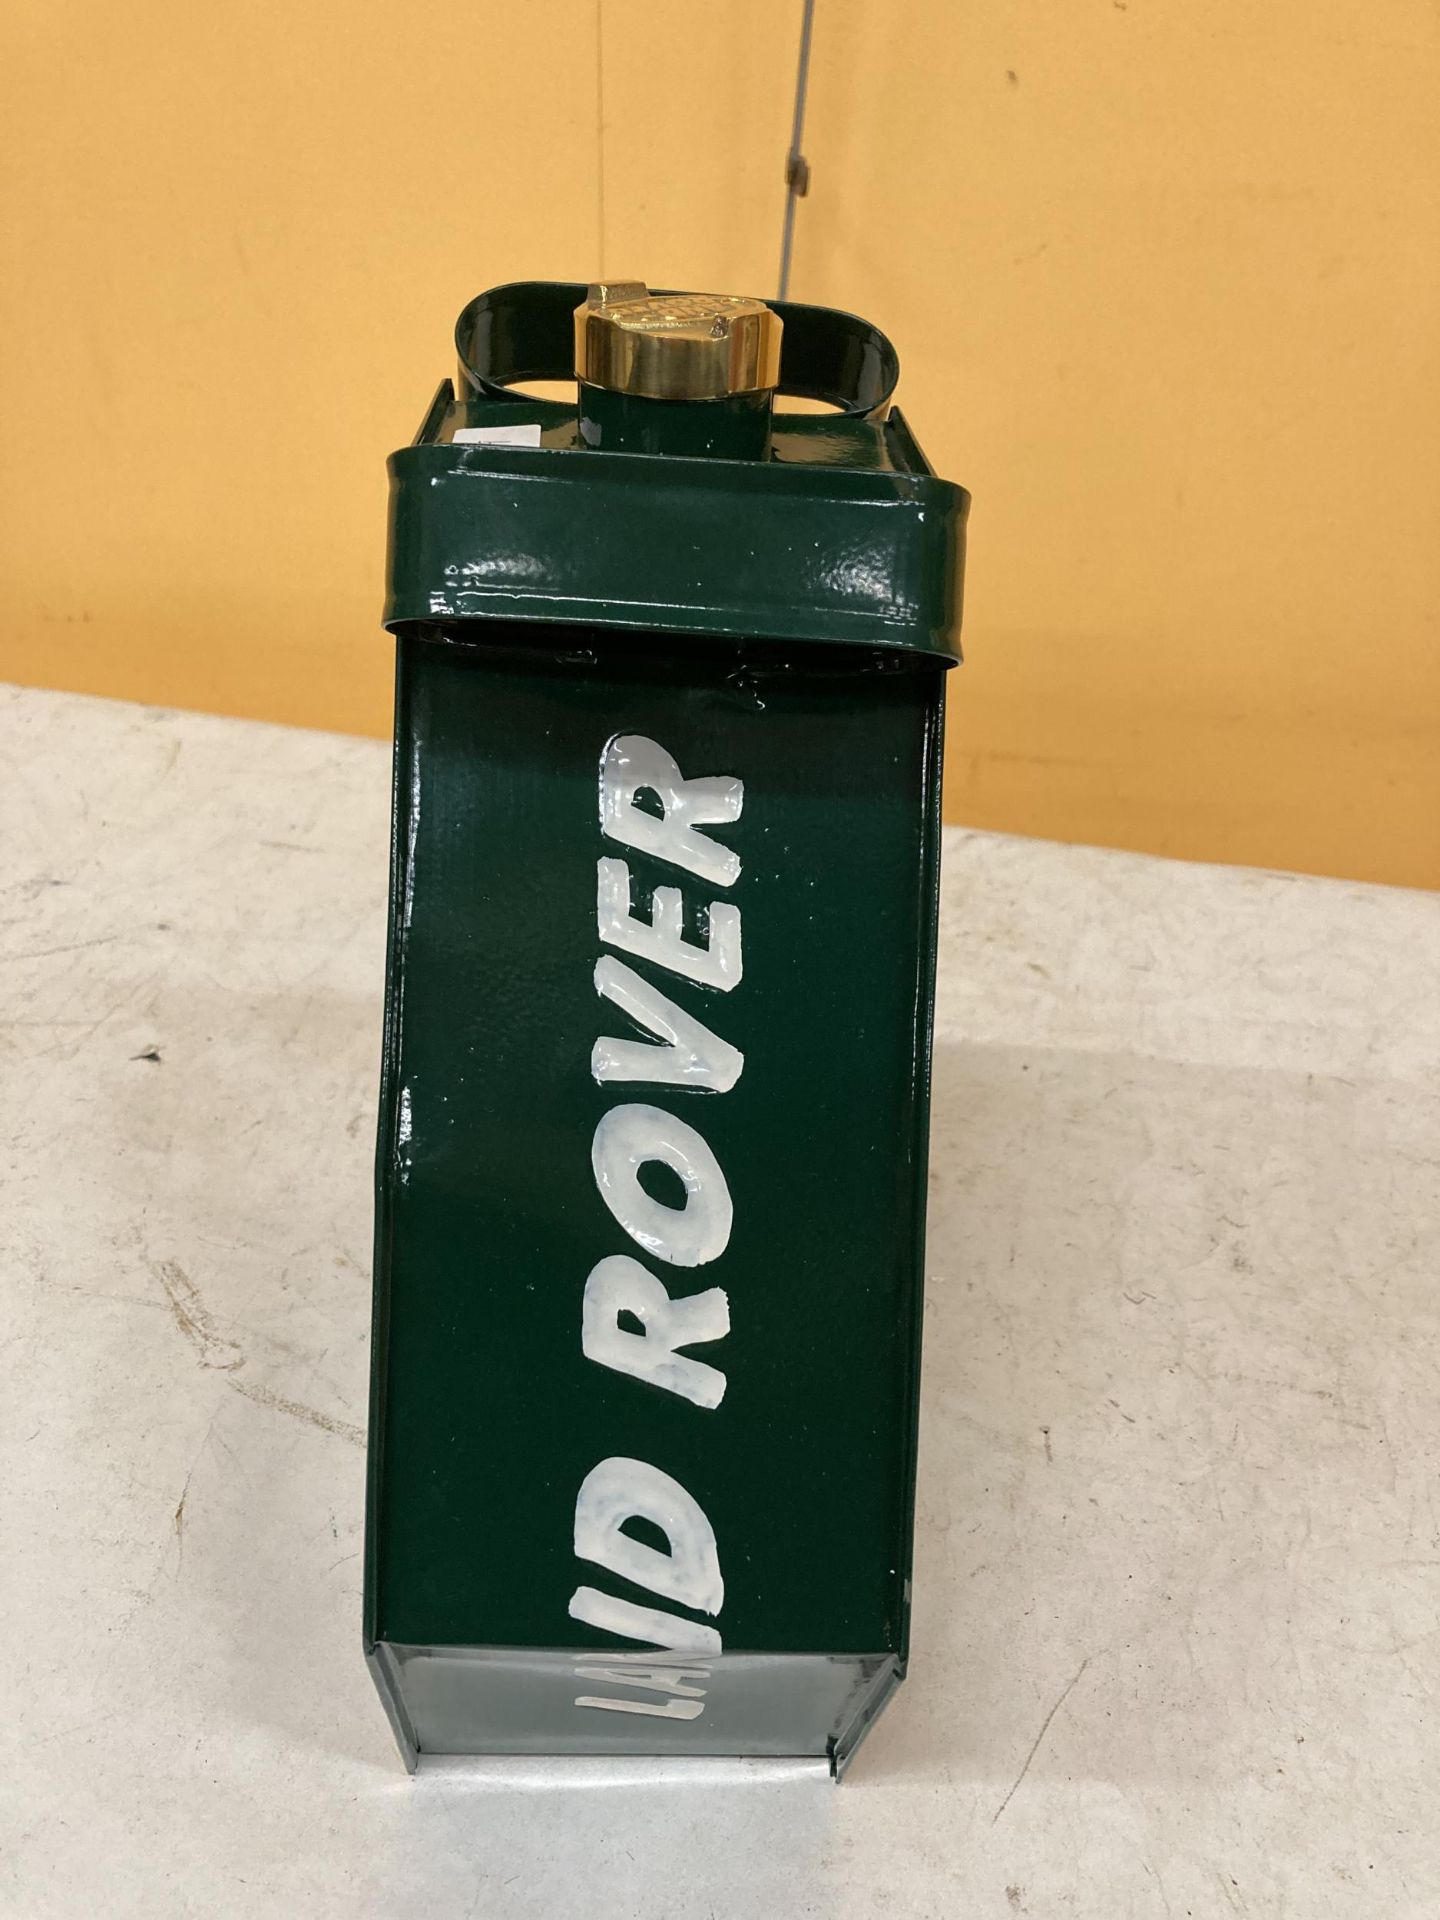 A GREEN LAND ROVER PETROL CAN - Image 2 of 3